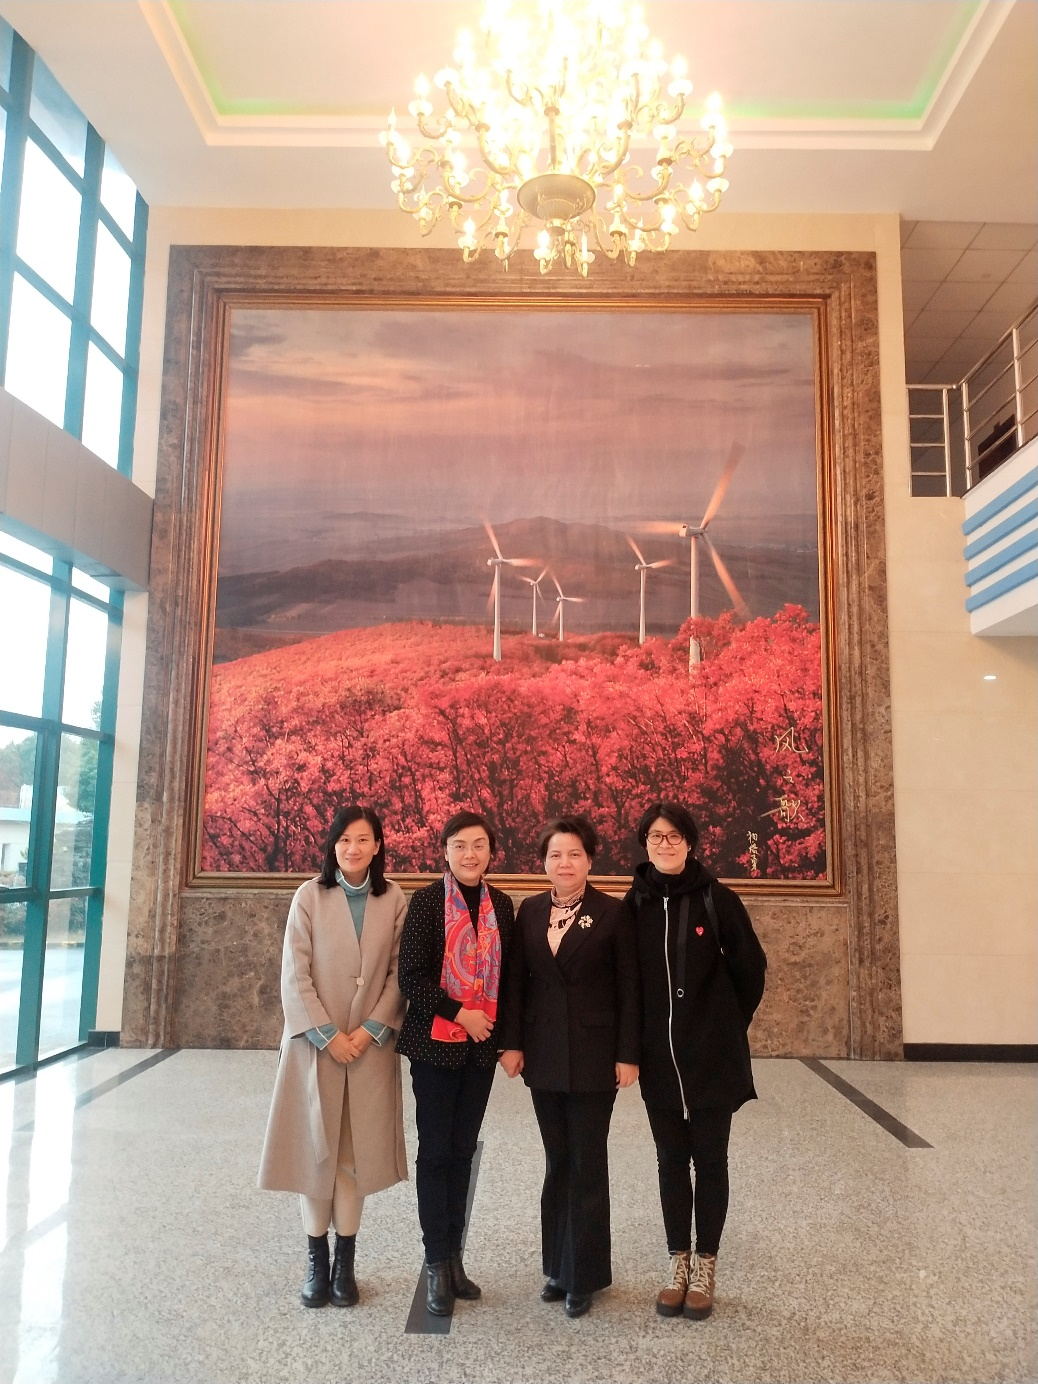 Weng Wenlei, Vice Chairman of Shanghai Women's Federation, visited our company